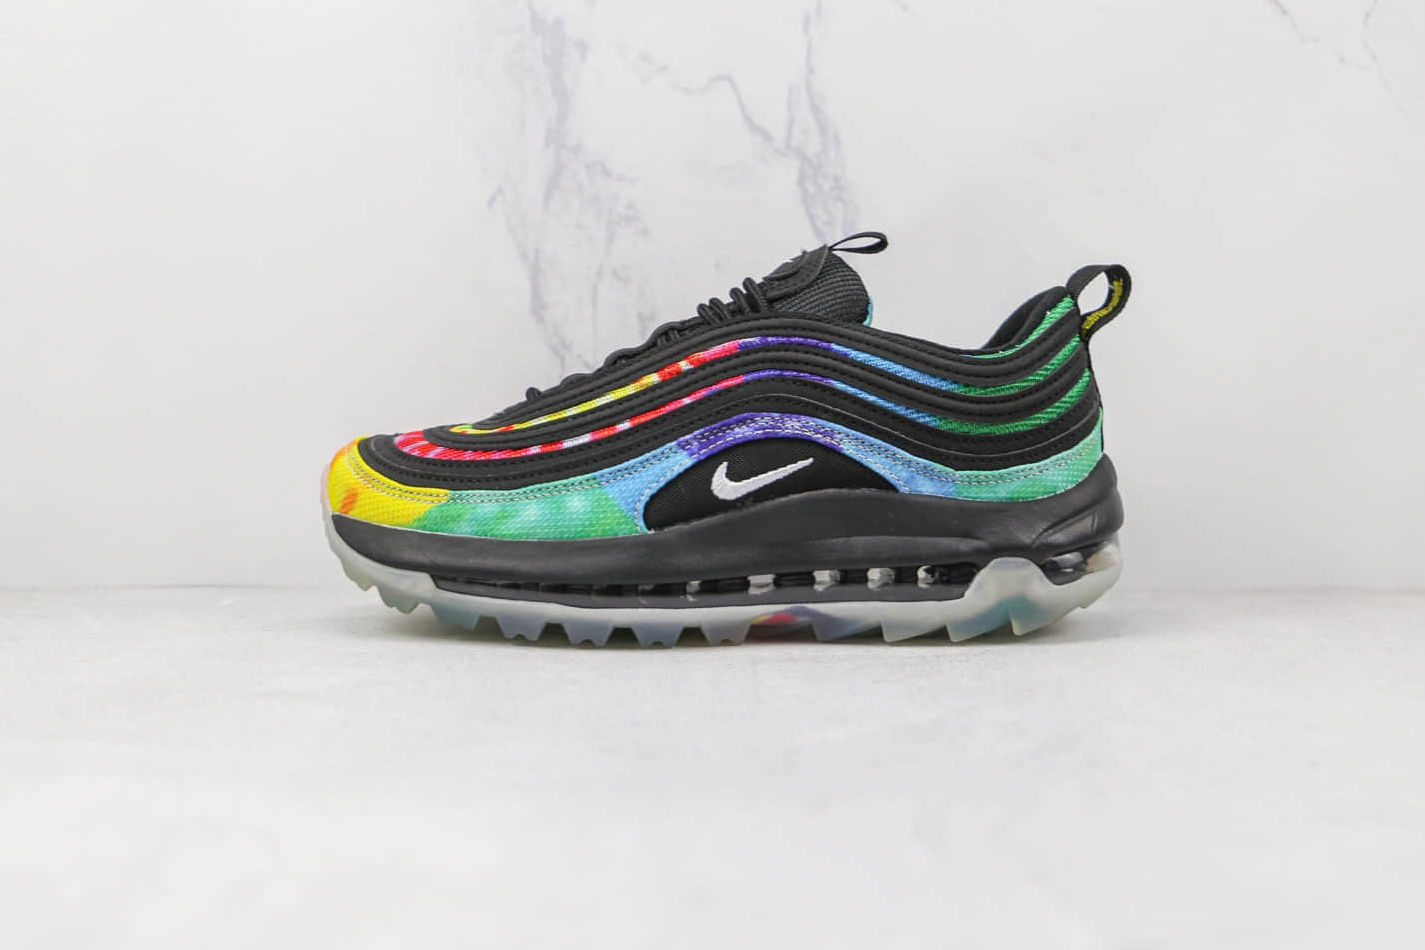 Nike Air Max 97 Essential White Melon Mint Volt CZ6087-100 - Stylish Sneakers for Every Occasion